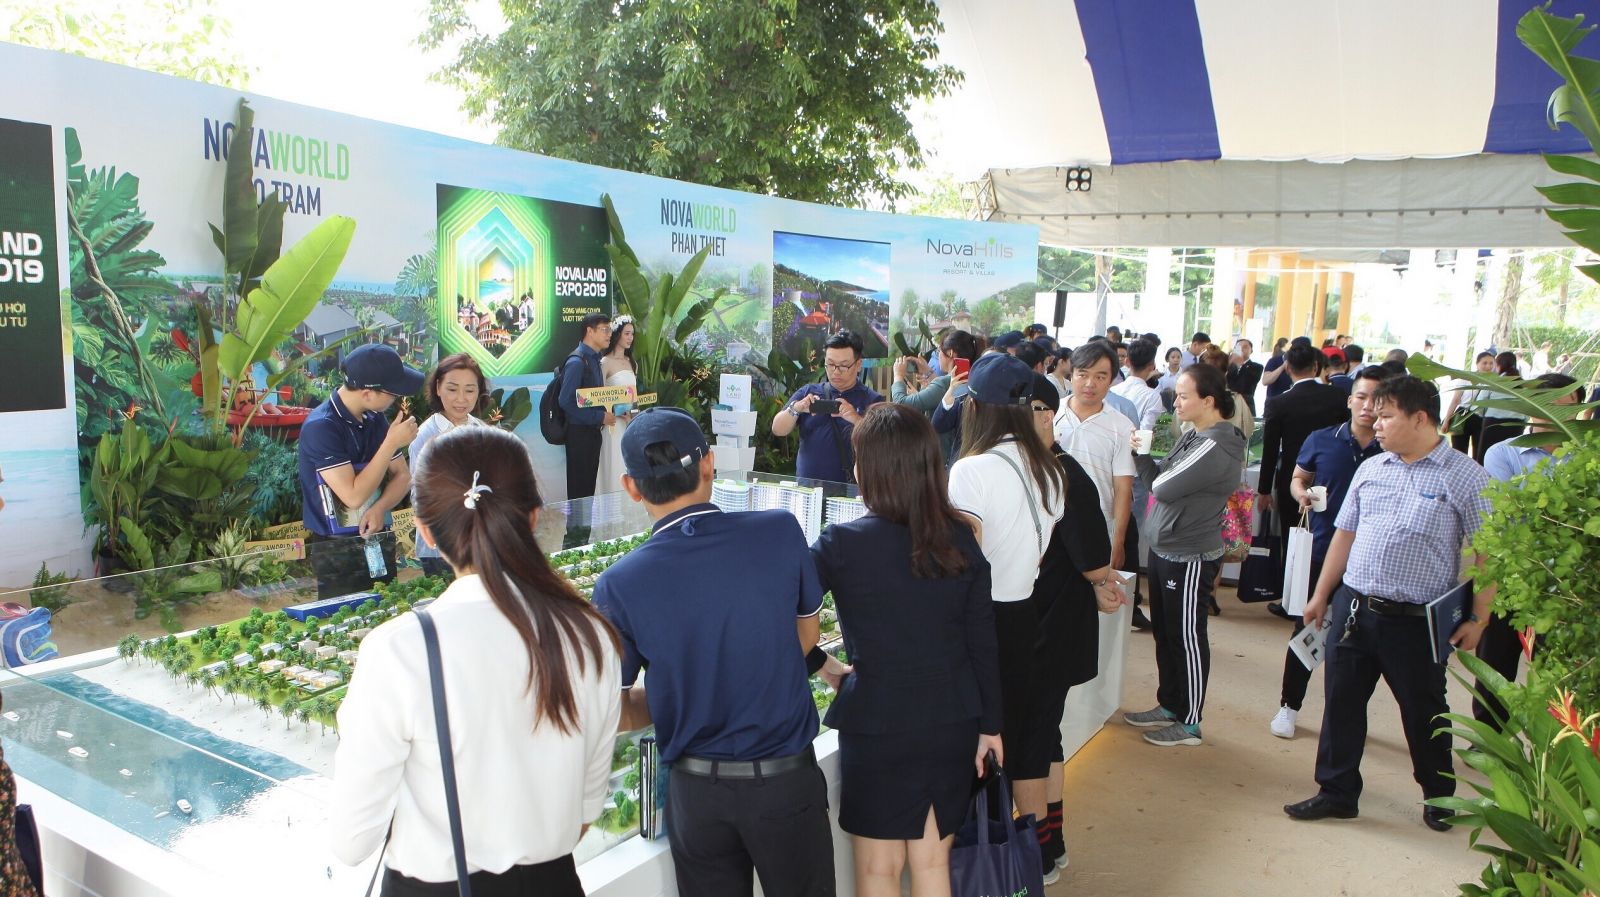 NovaWorld Ho Tram integrated resort proves to be a magnet to participants during the expo.